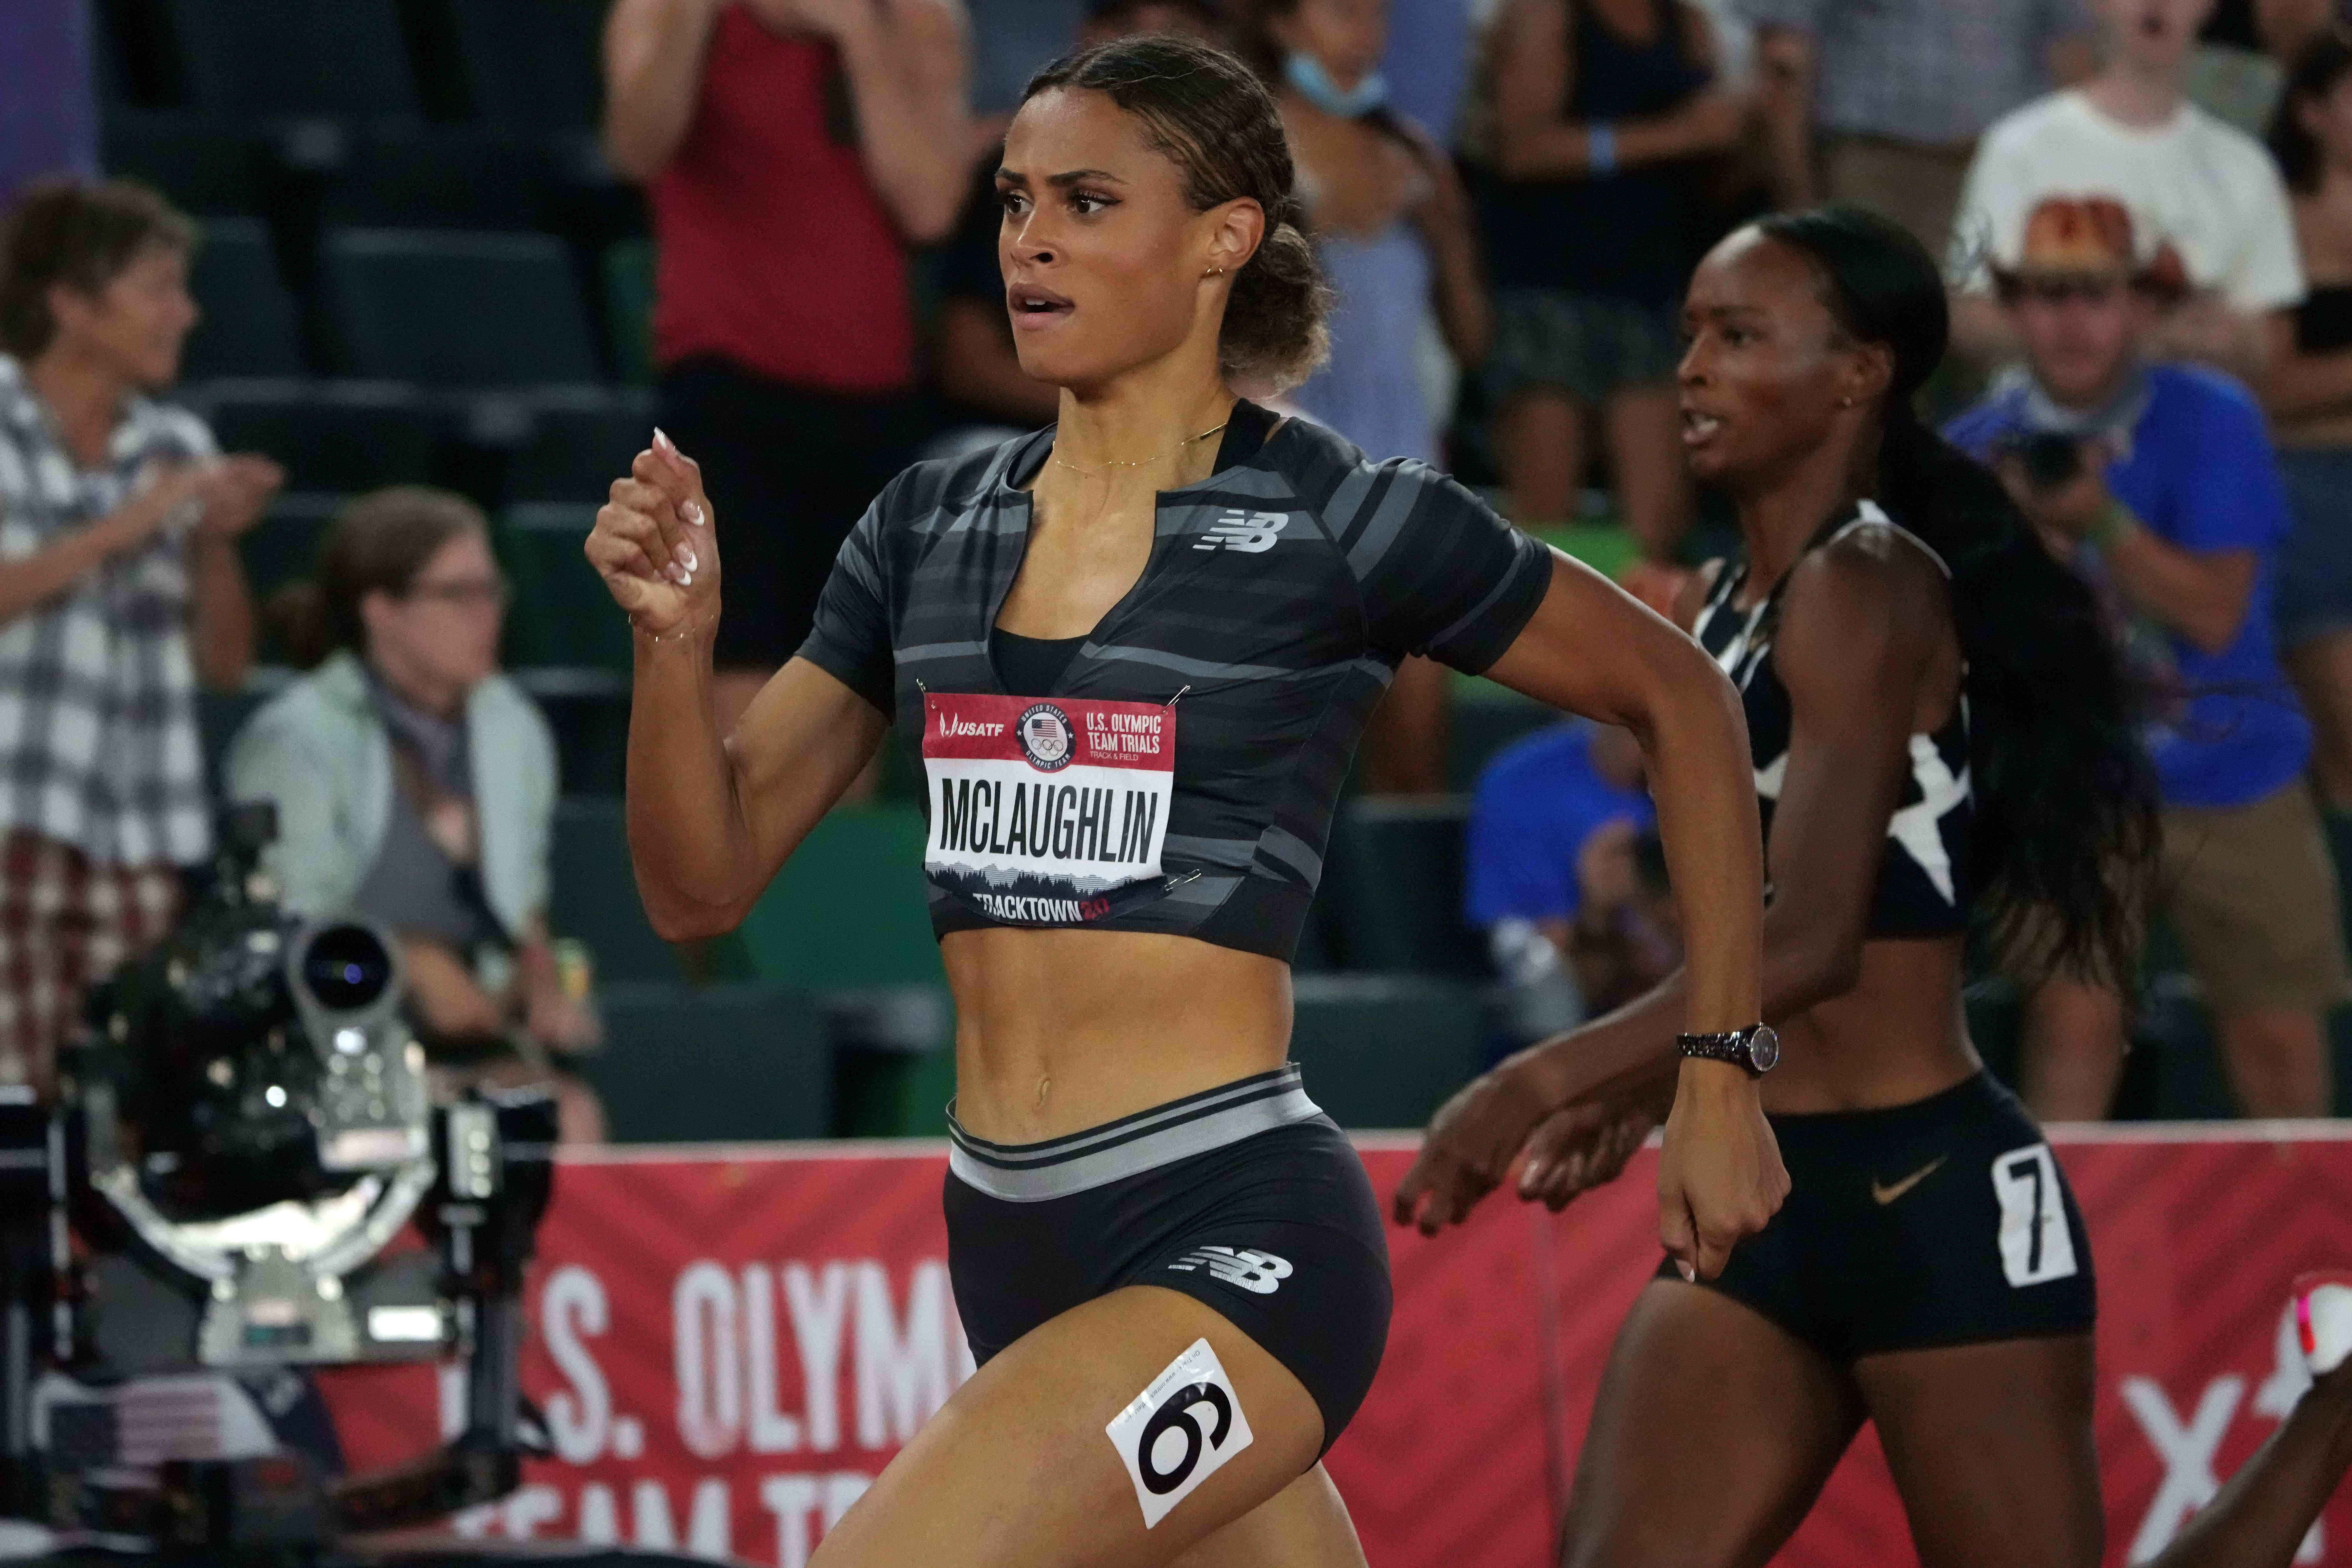 Sydney Mclaughlin Breaks World Record In 400 Hurdles At Olympic Trials